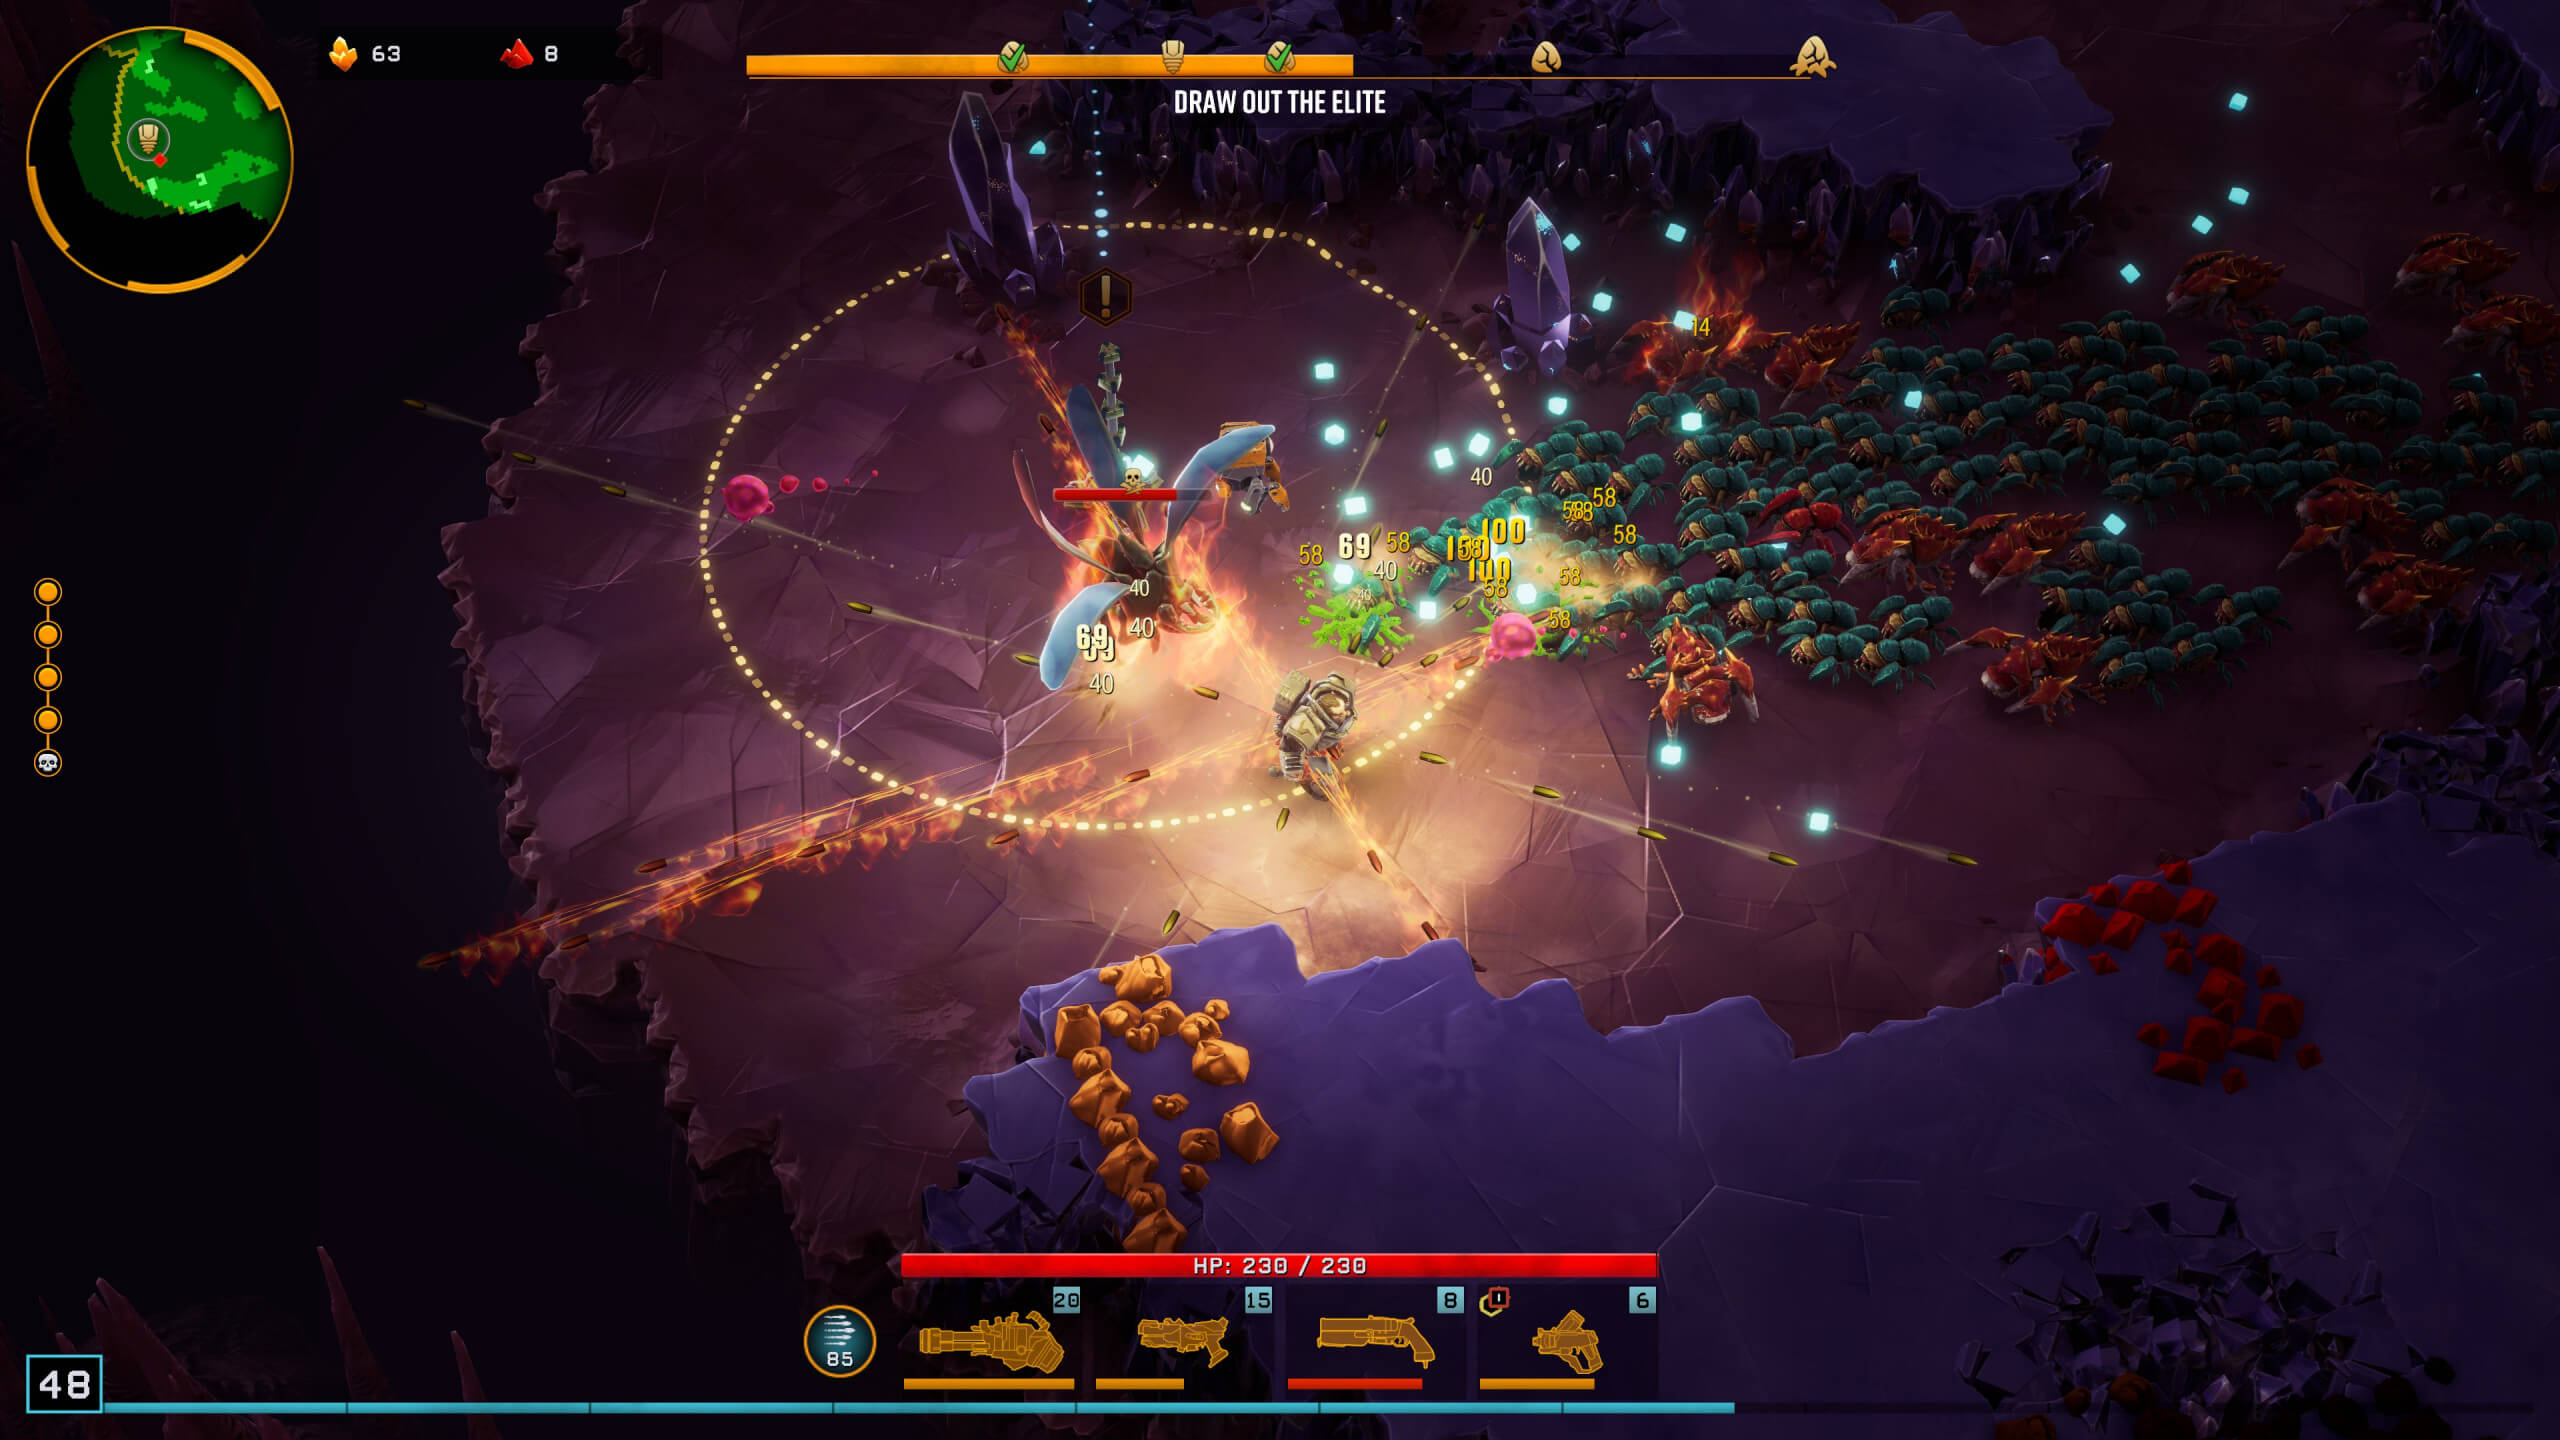 A screenshot of the game in action. The player's selected weapons are shown at the bottom of the screen and the dive timer at the top showing how far you have progressed to the elite. The gameplay shown is of a miner moving toward the left of the screen with a mass of bugs following close behind, getting killed in the process and leaving little xp gems in their wake.